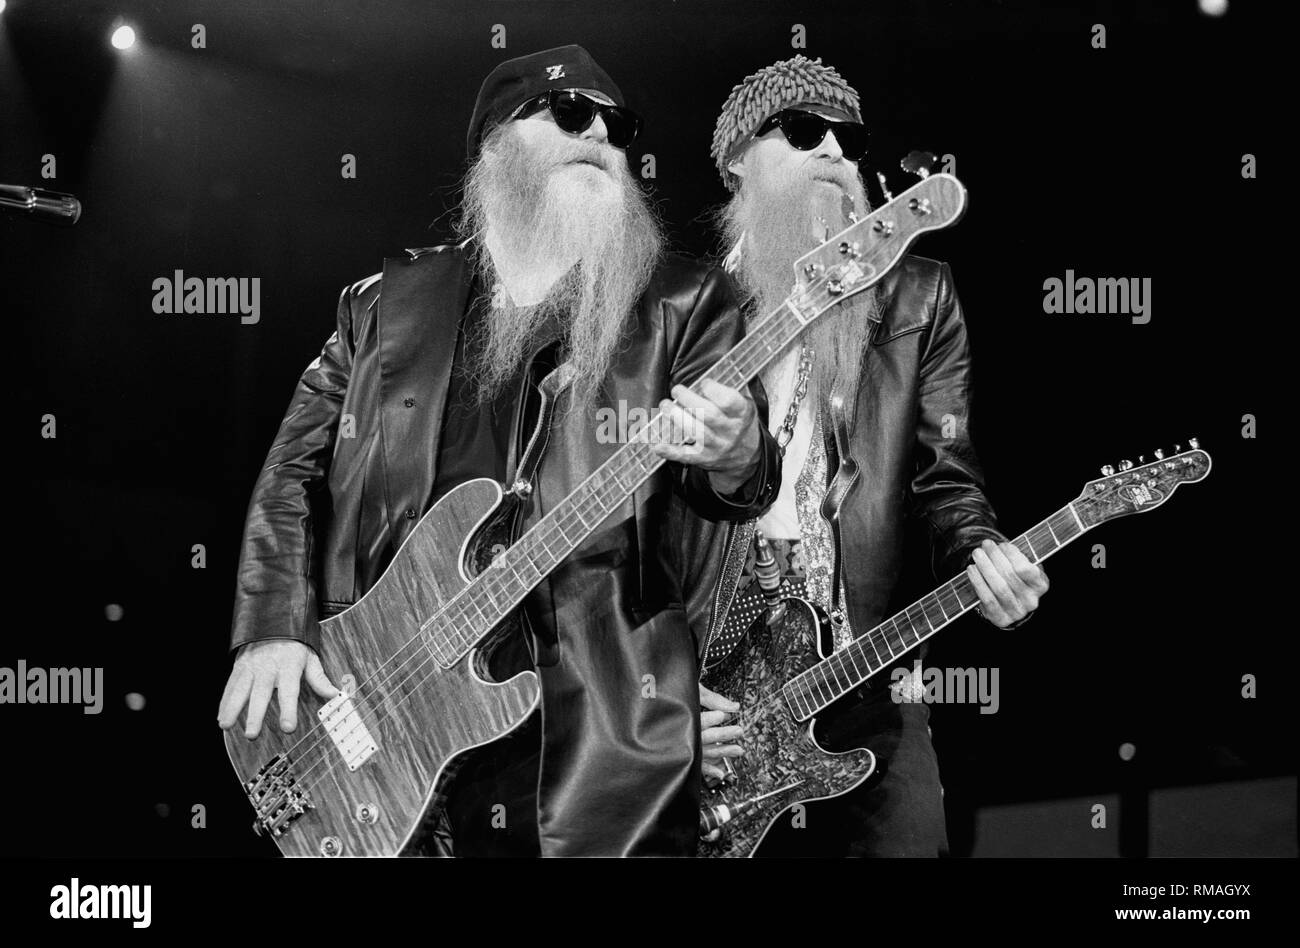 Musicians Dusty Hill and Billy Gibbons of the rock band ZZ Top are shown  performing on stage during a "live" appearance Stock Photo - Alamy